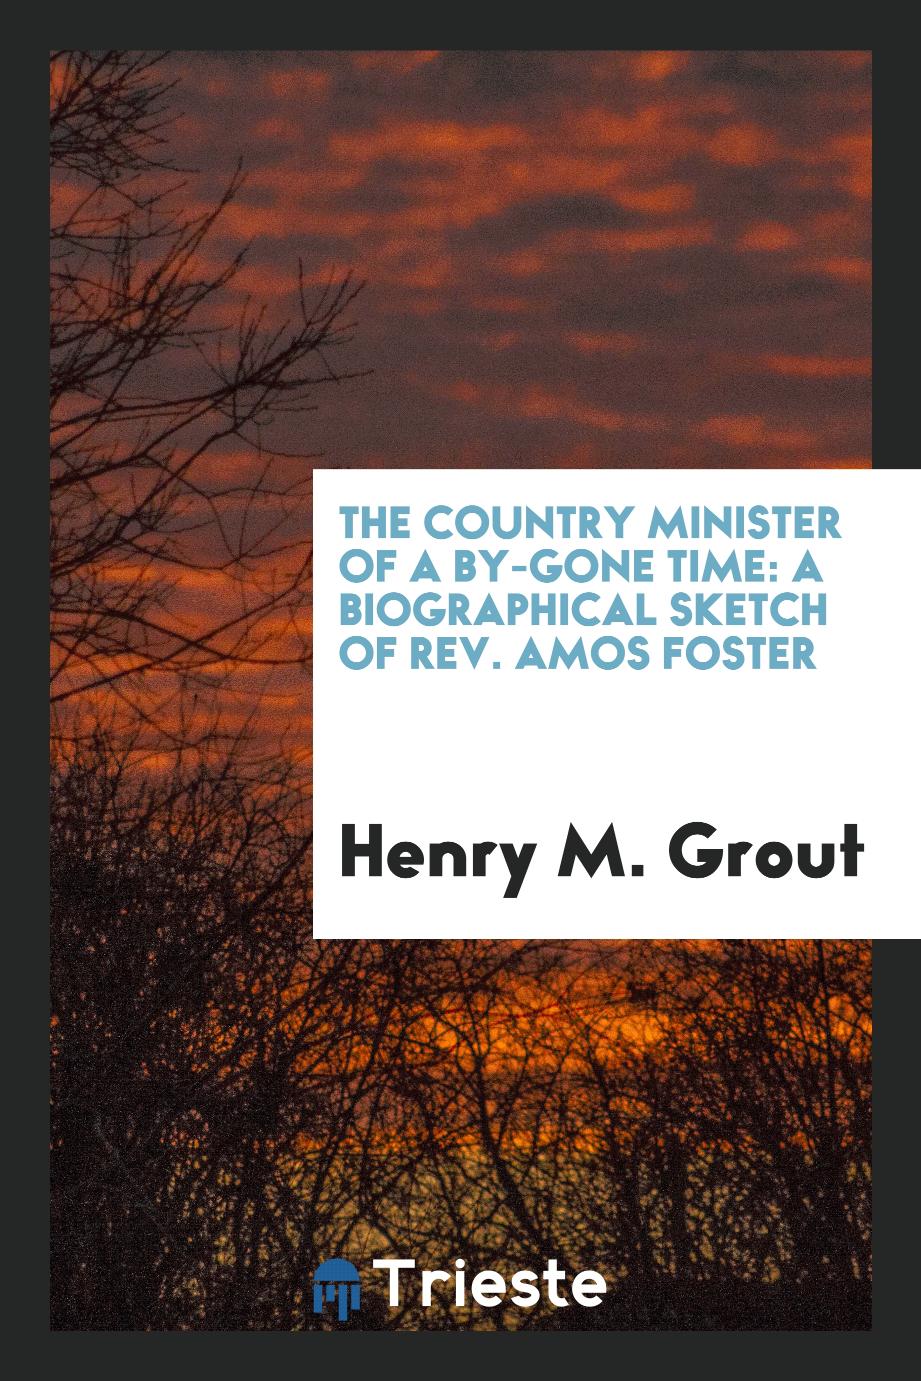 The Country Minister of a By-Gone Time: A Biographical Sketch of Rev. Amos Foster